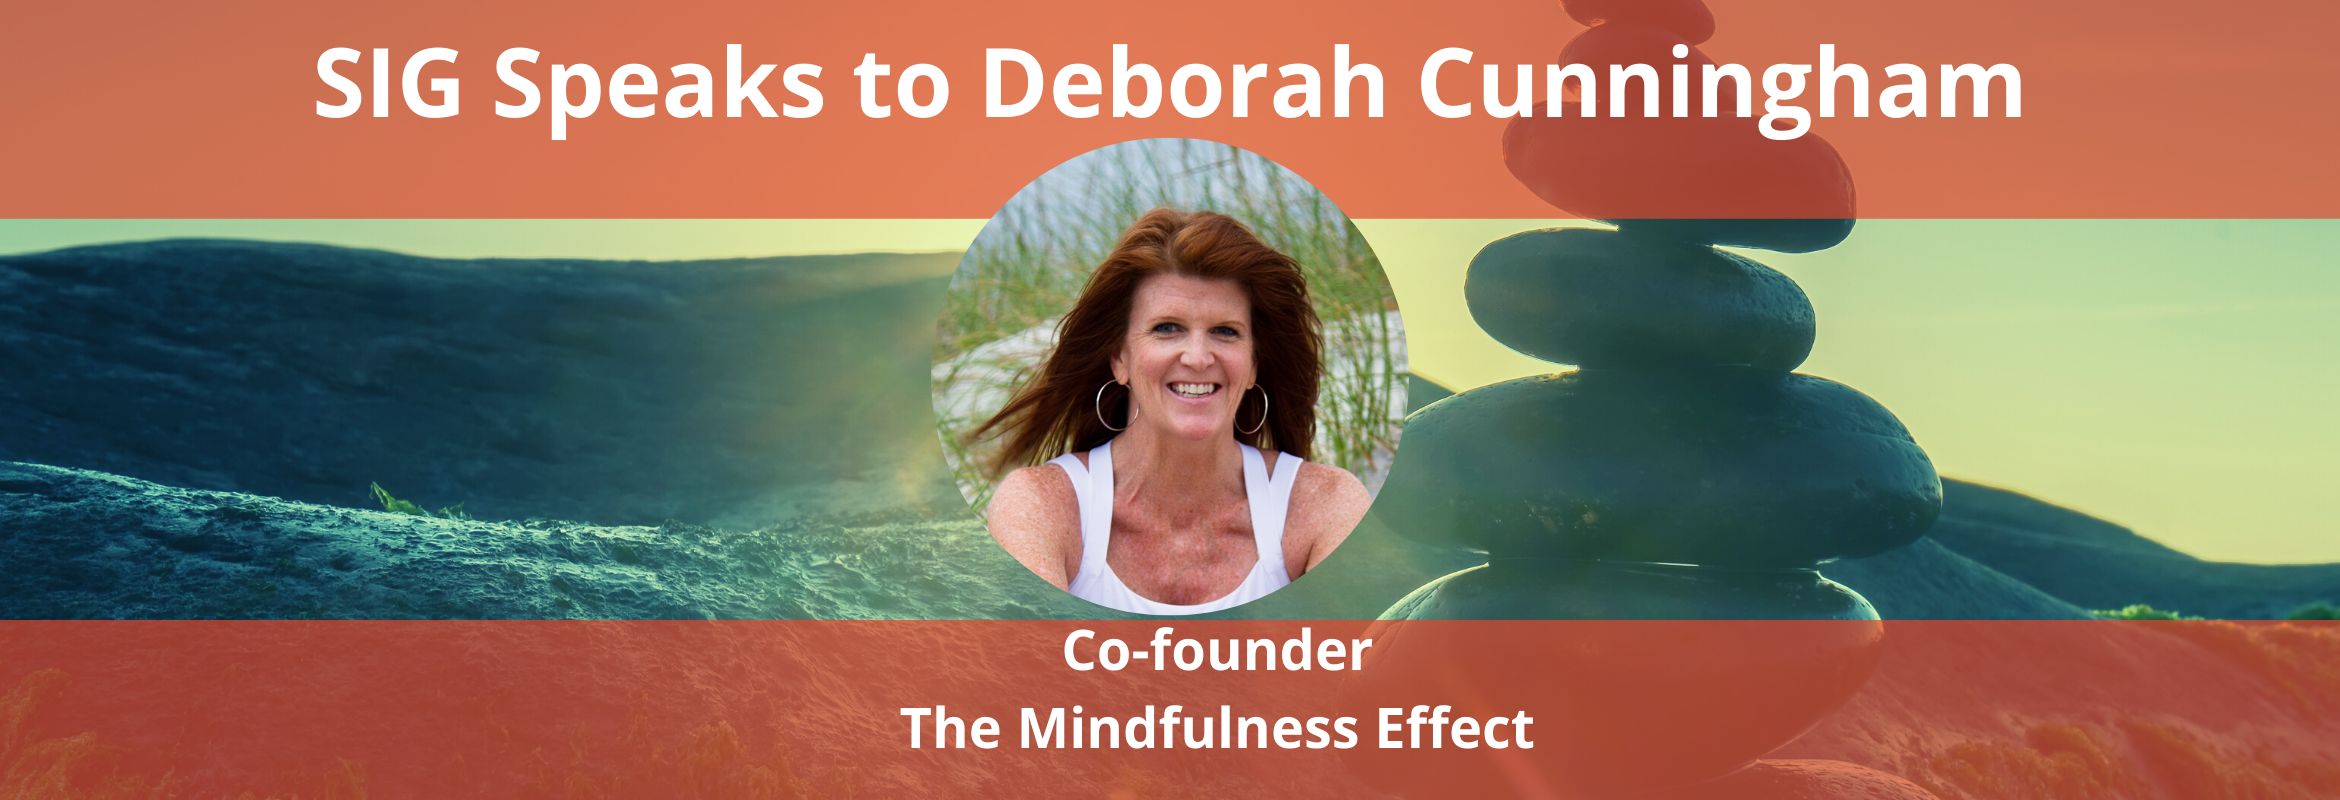 Deborah Cunningham is the Co-founder of The Mindfulness Effect